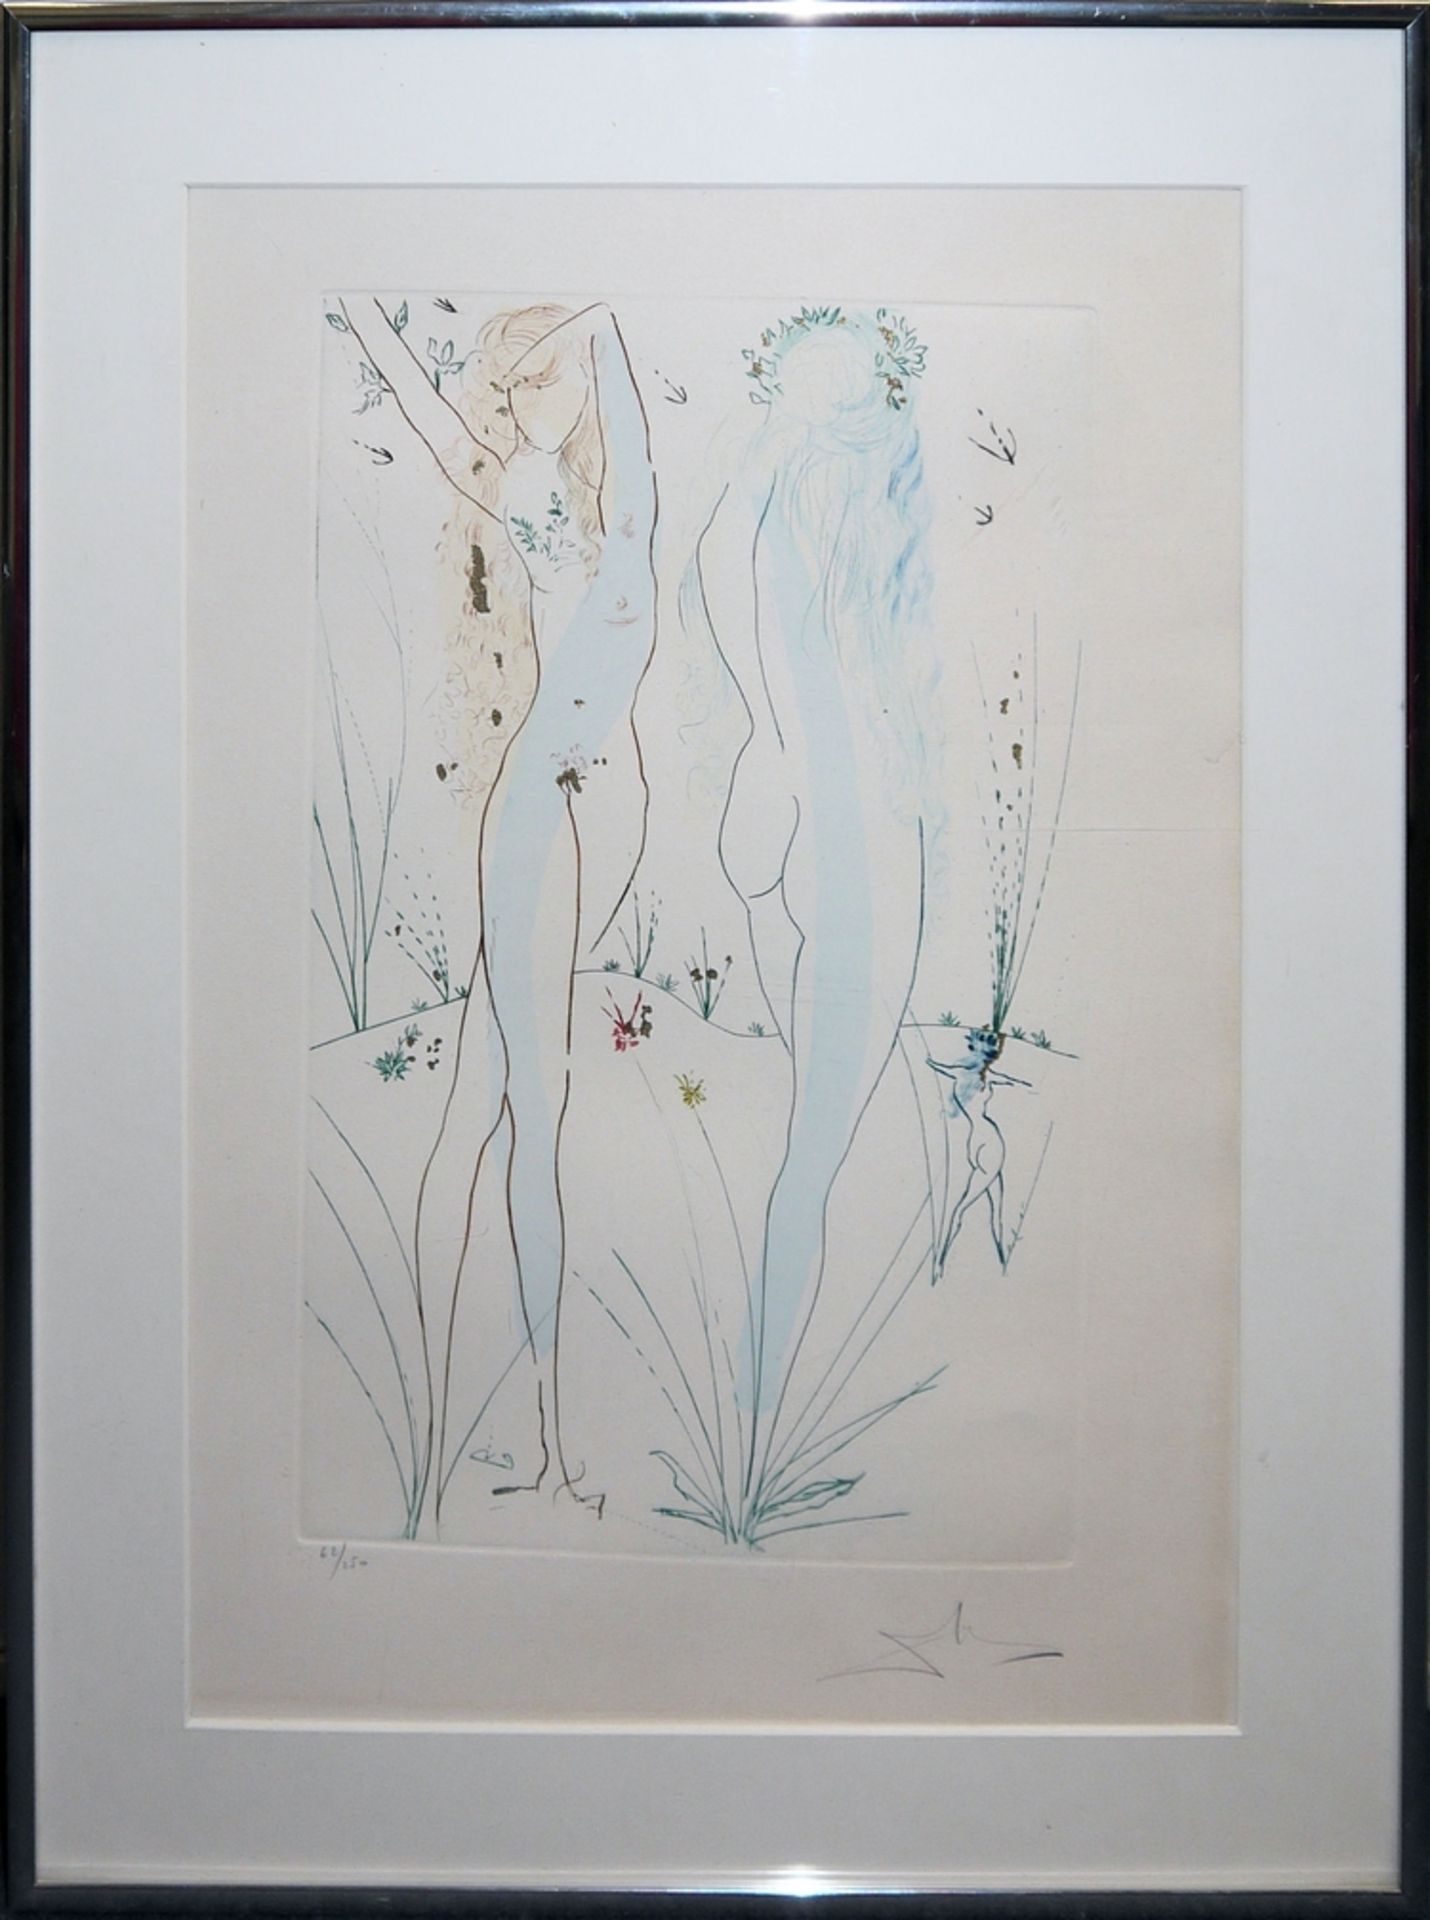 Salvador Dalí, "Return, Sulamit", etching with pochoir and gold plating from 1971 and silver medal